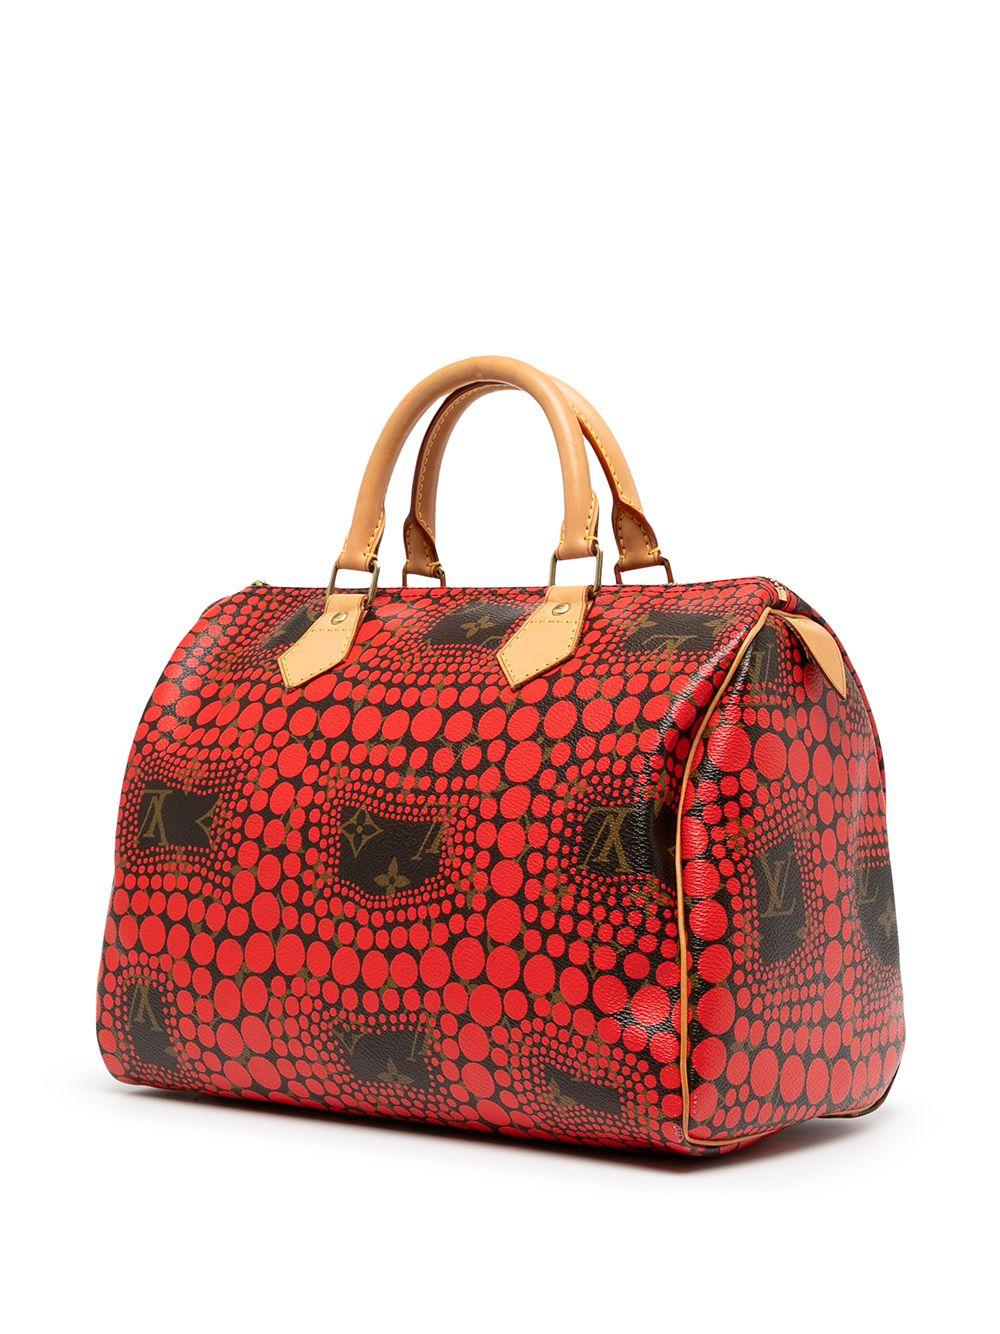 A phenomenon, Yayoi Kusama looks to inspire joy and happiness from her work. Collaborating with Louis Vuitton in 2012, the collection boasts bold and playful designs inspired by her signature spot design. Featuring a graphic red polka dot print on